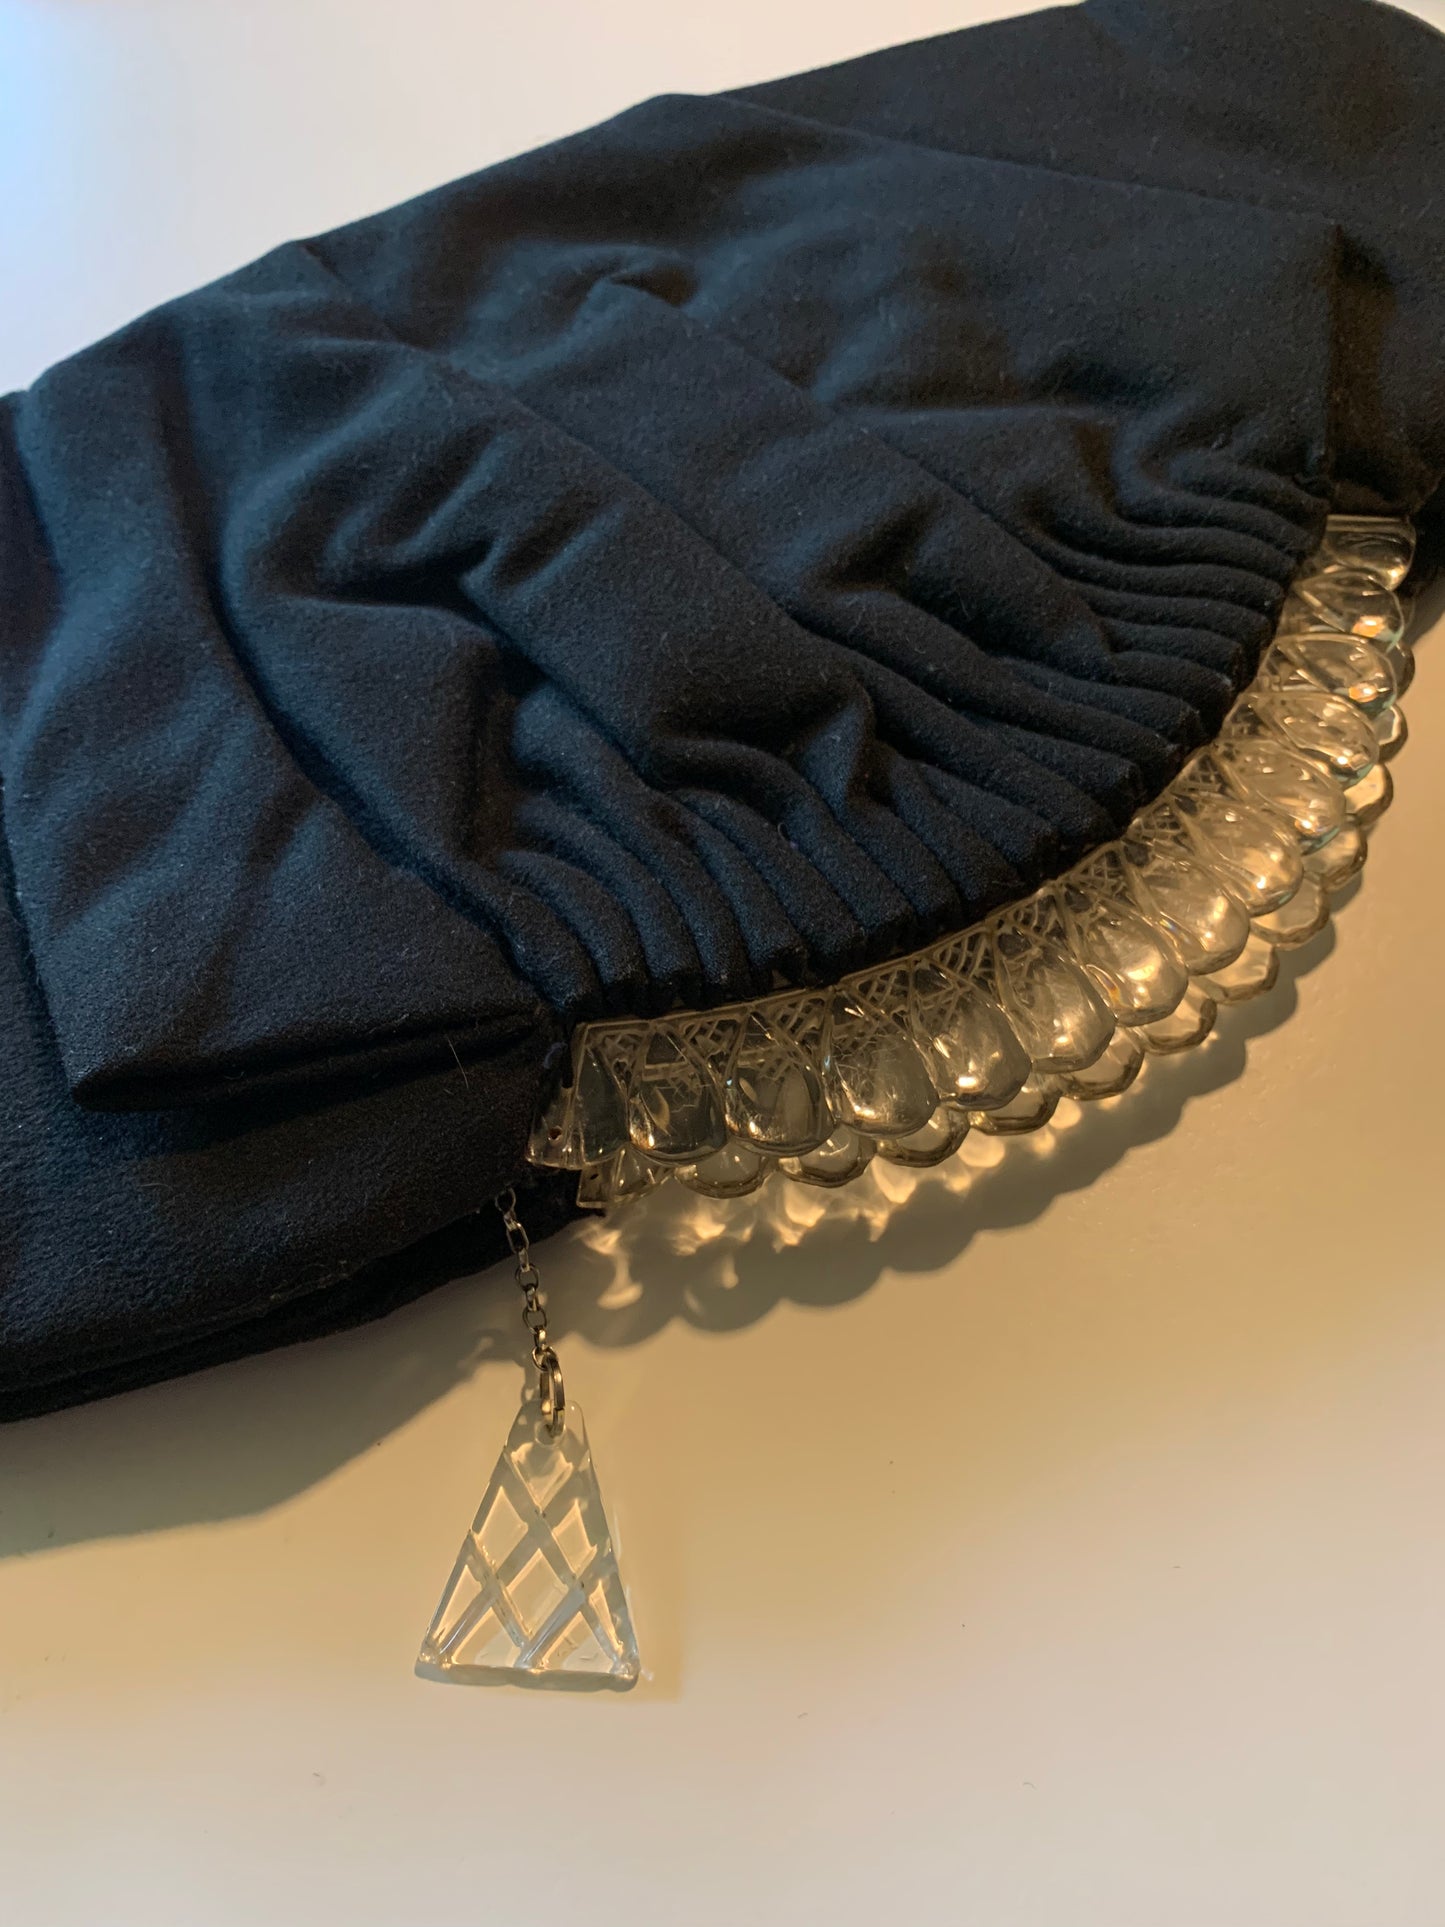 Elegant Black Wool Clutch Handbag with Carved Lucite Crown Clasp circa 1940s